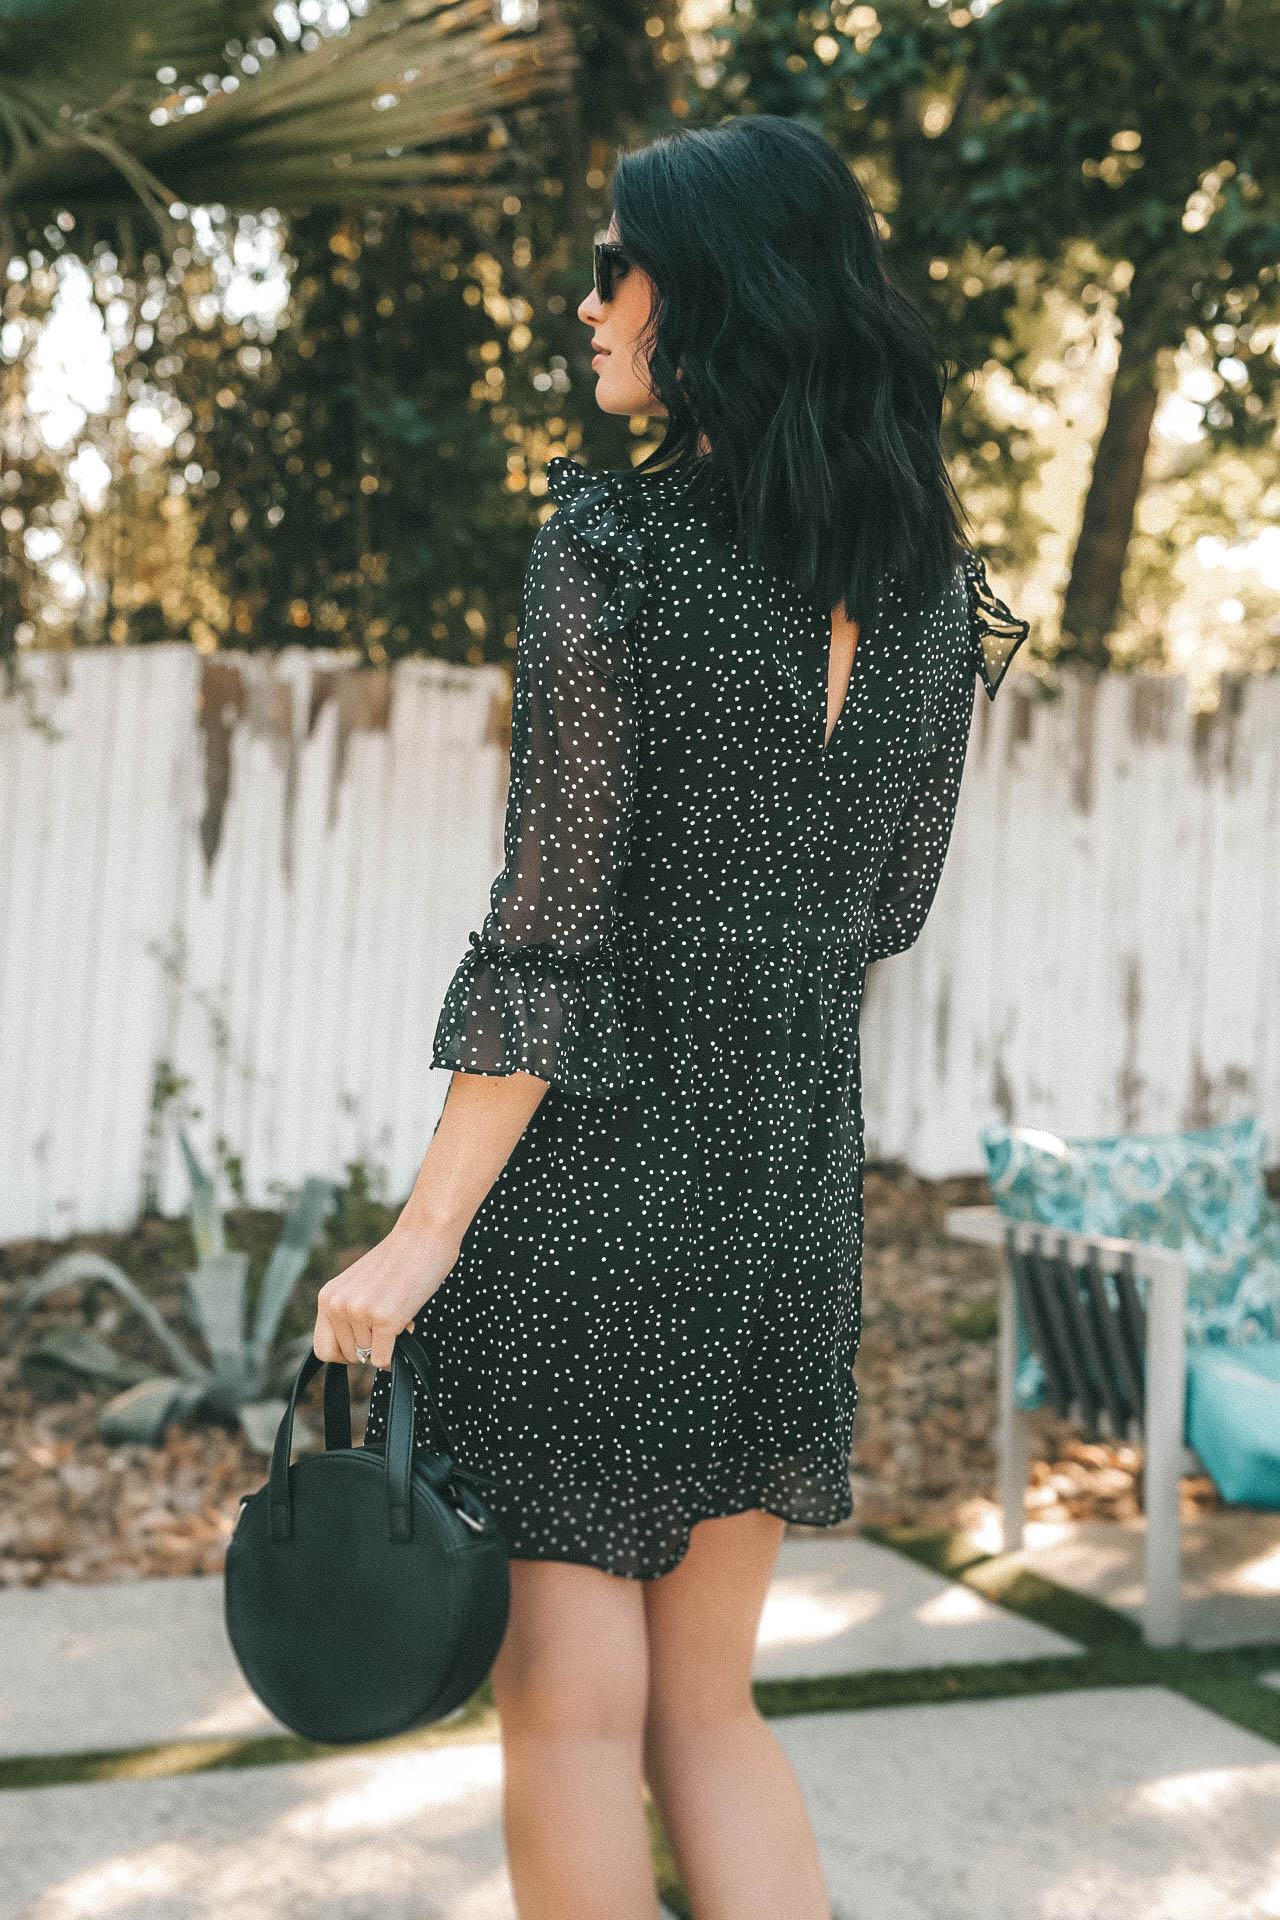 #ad This Polka Dot Dress from @Walmart makes a perfect summer statement! Pair it with a wedge heel, a handbag and sunnies and you're ready for a summer night out! || Dressed to Kill #sponsored #WeDressAmerica #WalmartFashion #summerstyle  | We Dress America Walmart campaign featured by top US fashion blog, Dressed to Kill: image of a woman wearing a Walmart polka dot mini dress, Walmart crossbody circle bag, and Walmart wedge sandals